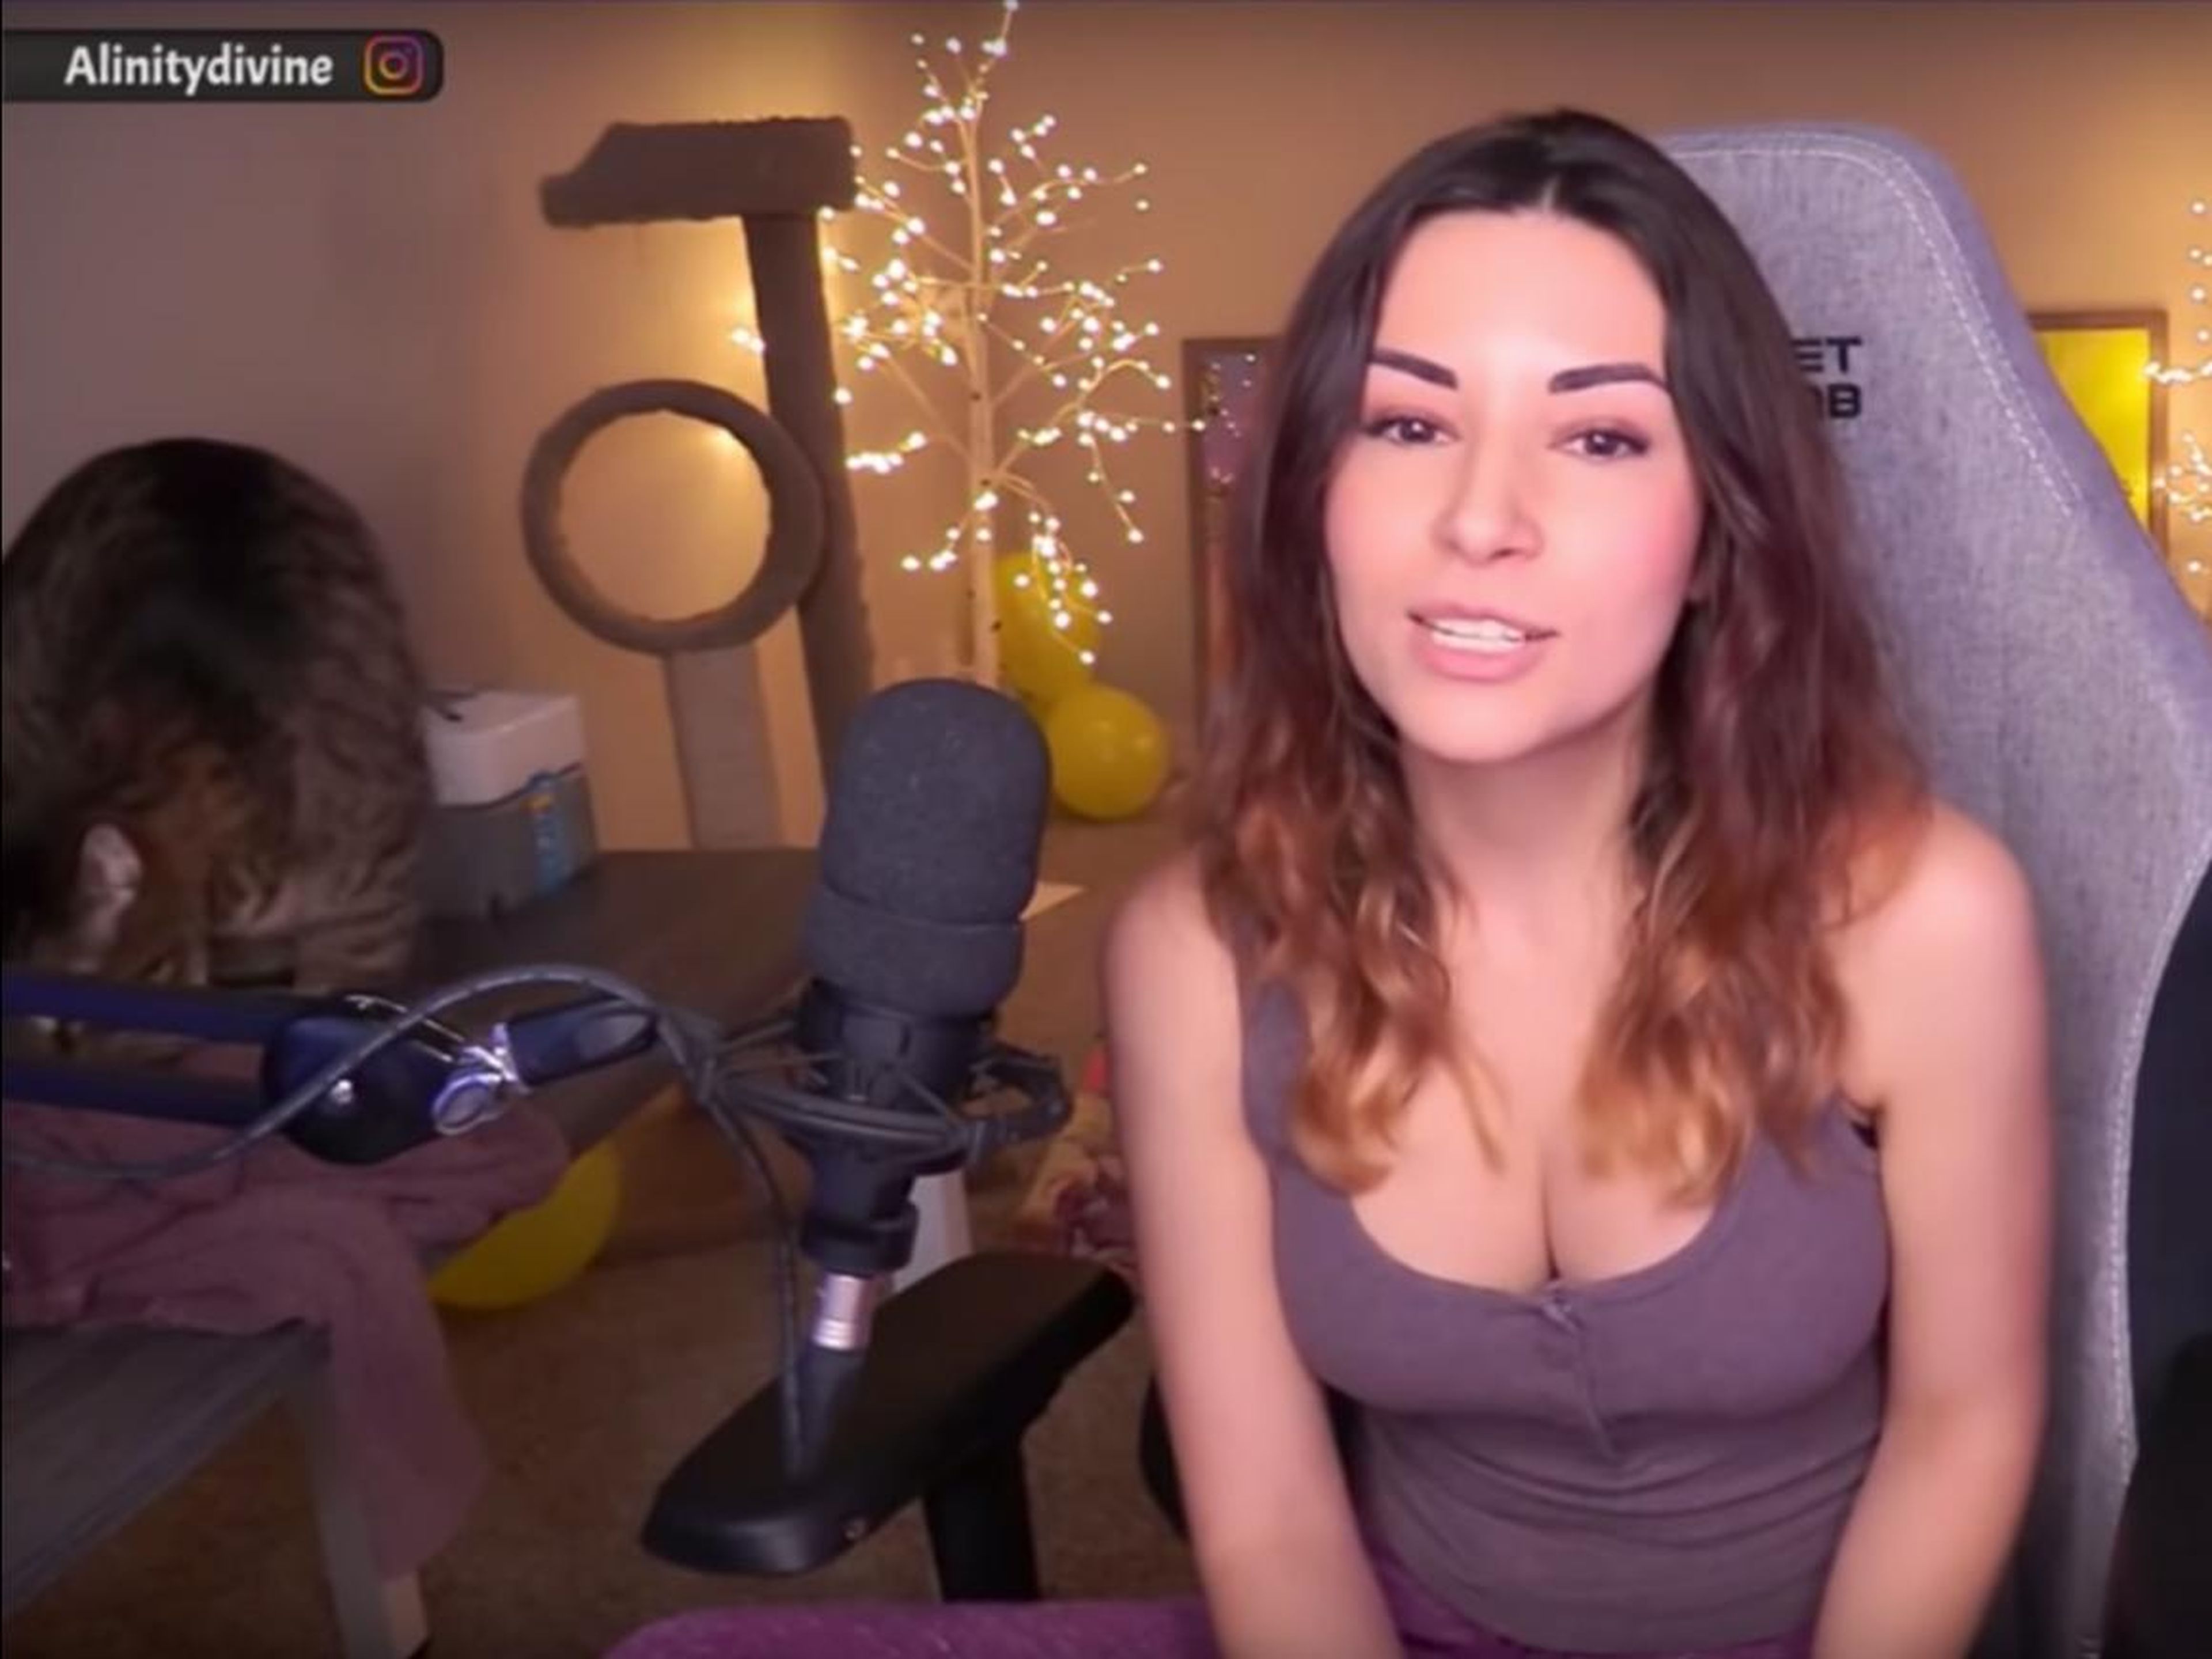 Kjellberg made sexist remarks in May 2018, referring to female gaming streamers as "stupid Twitch thots." After Twitch streamer Alinity retaliated by filing a copyright claim against one of Kjellberg's videos, Kjellberg derided